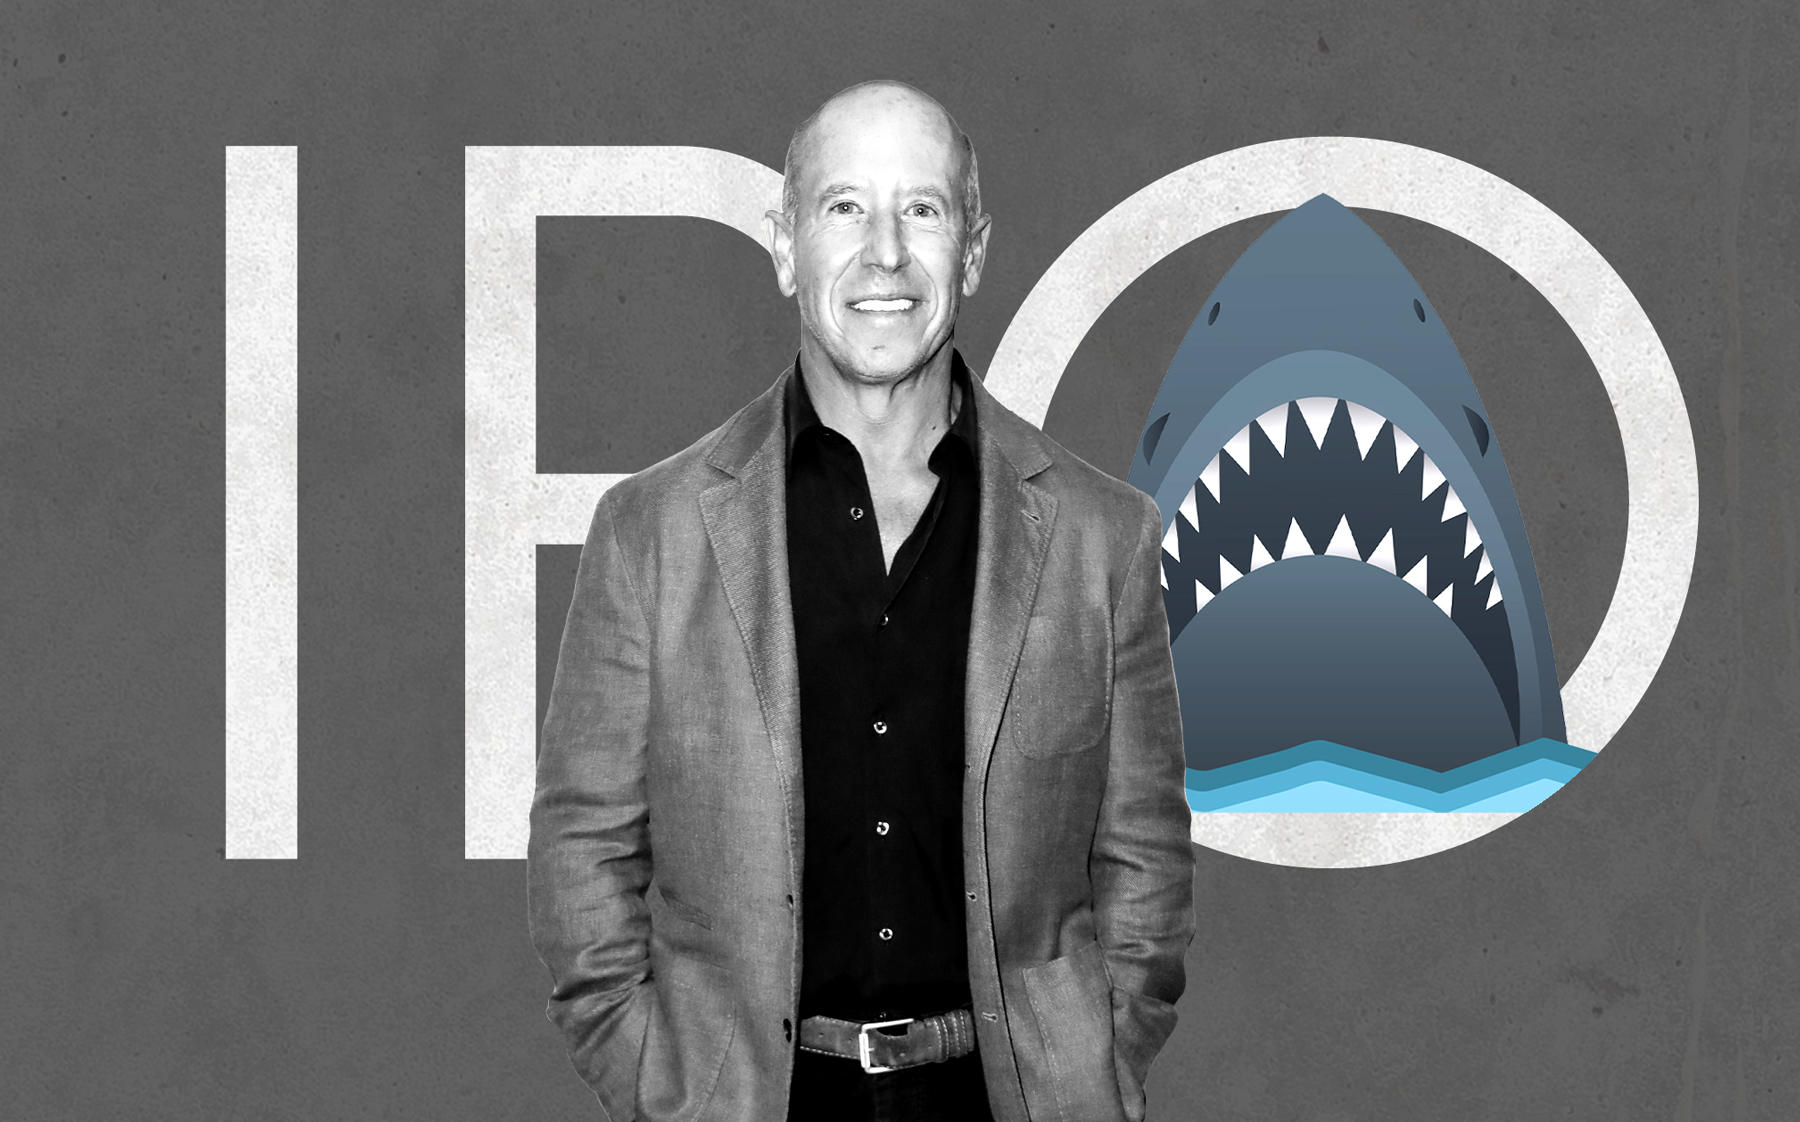 Jaws Acquisition and Starwood Capital founder Barry Sternlicht (Sternlicht by Leon Bennett/Getty Images; iStock)